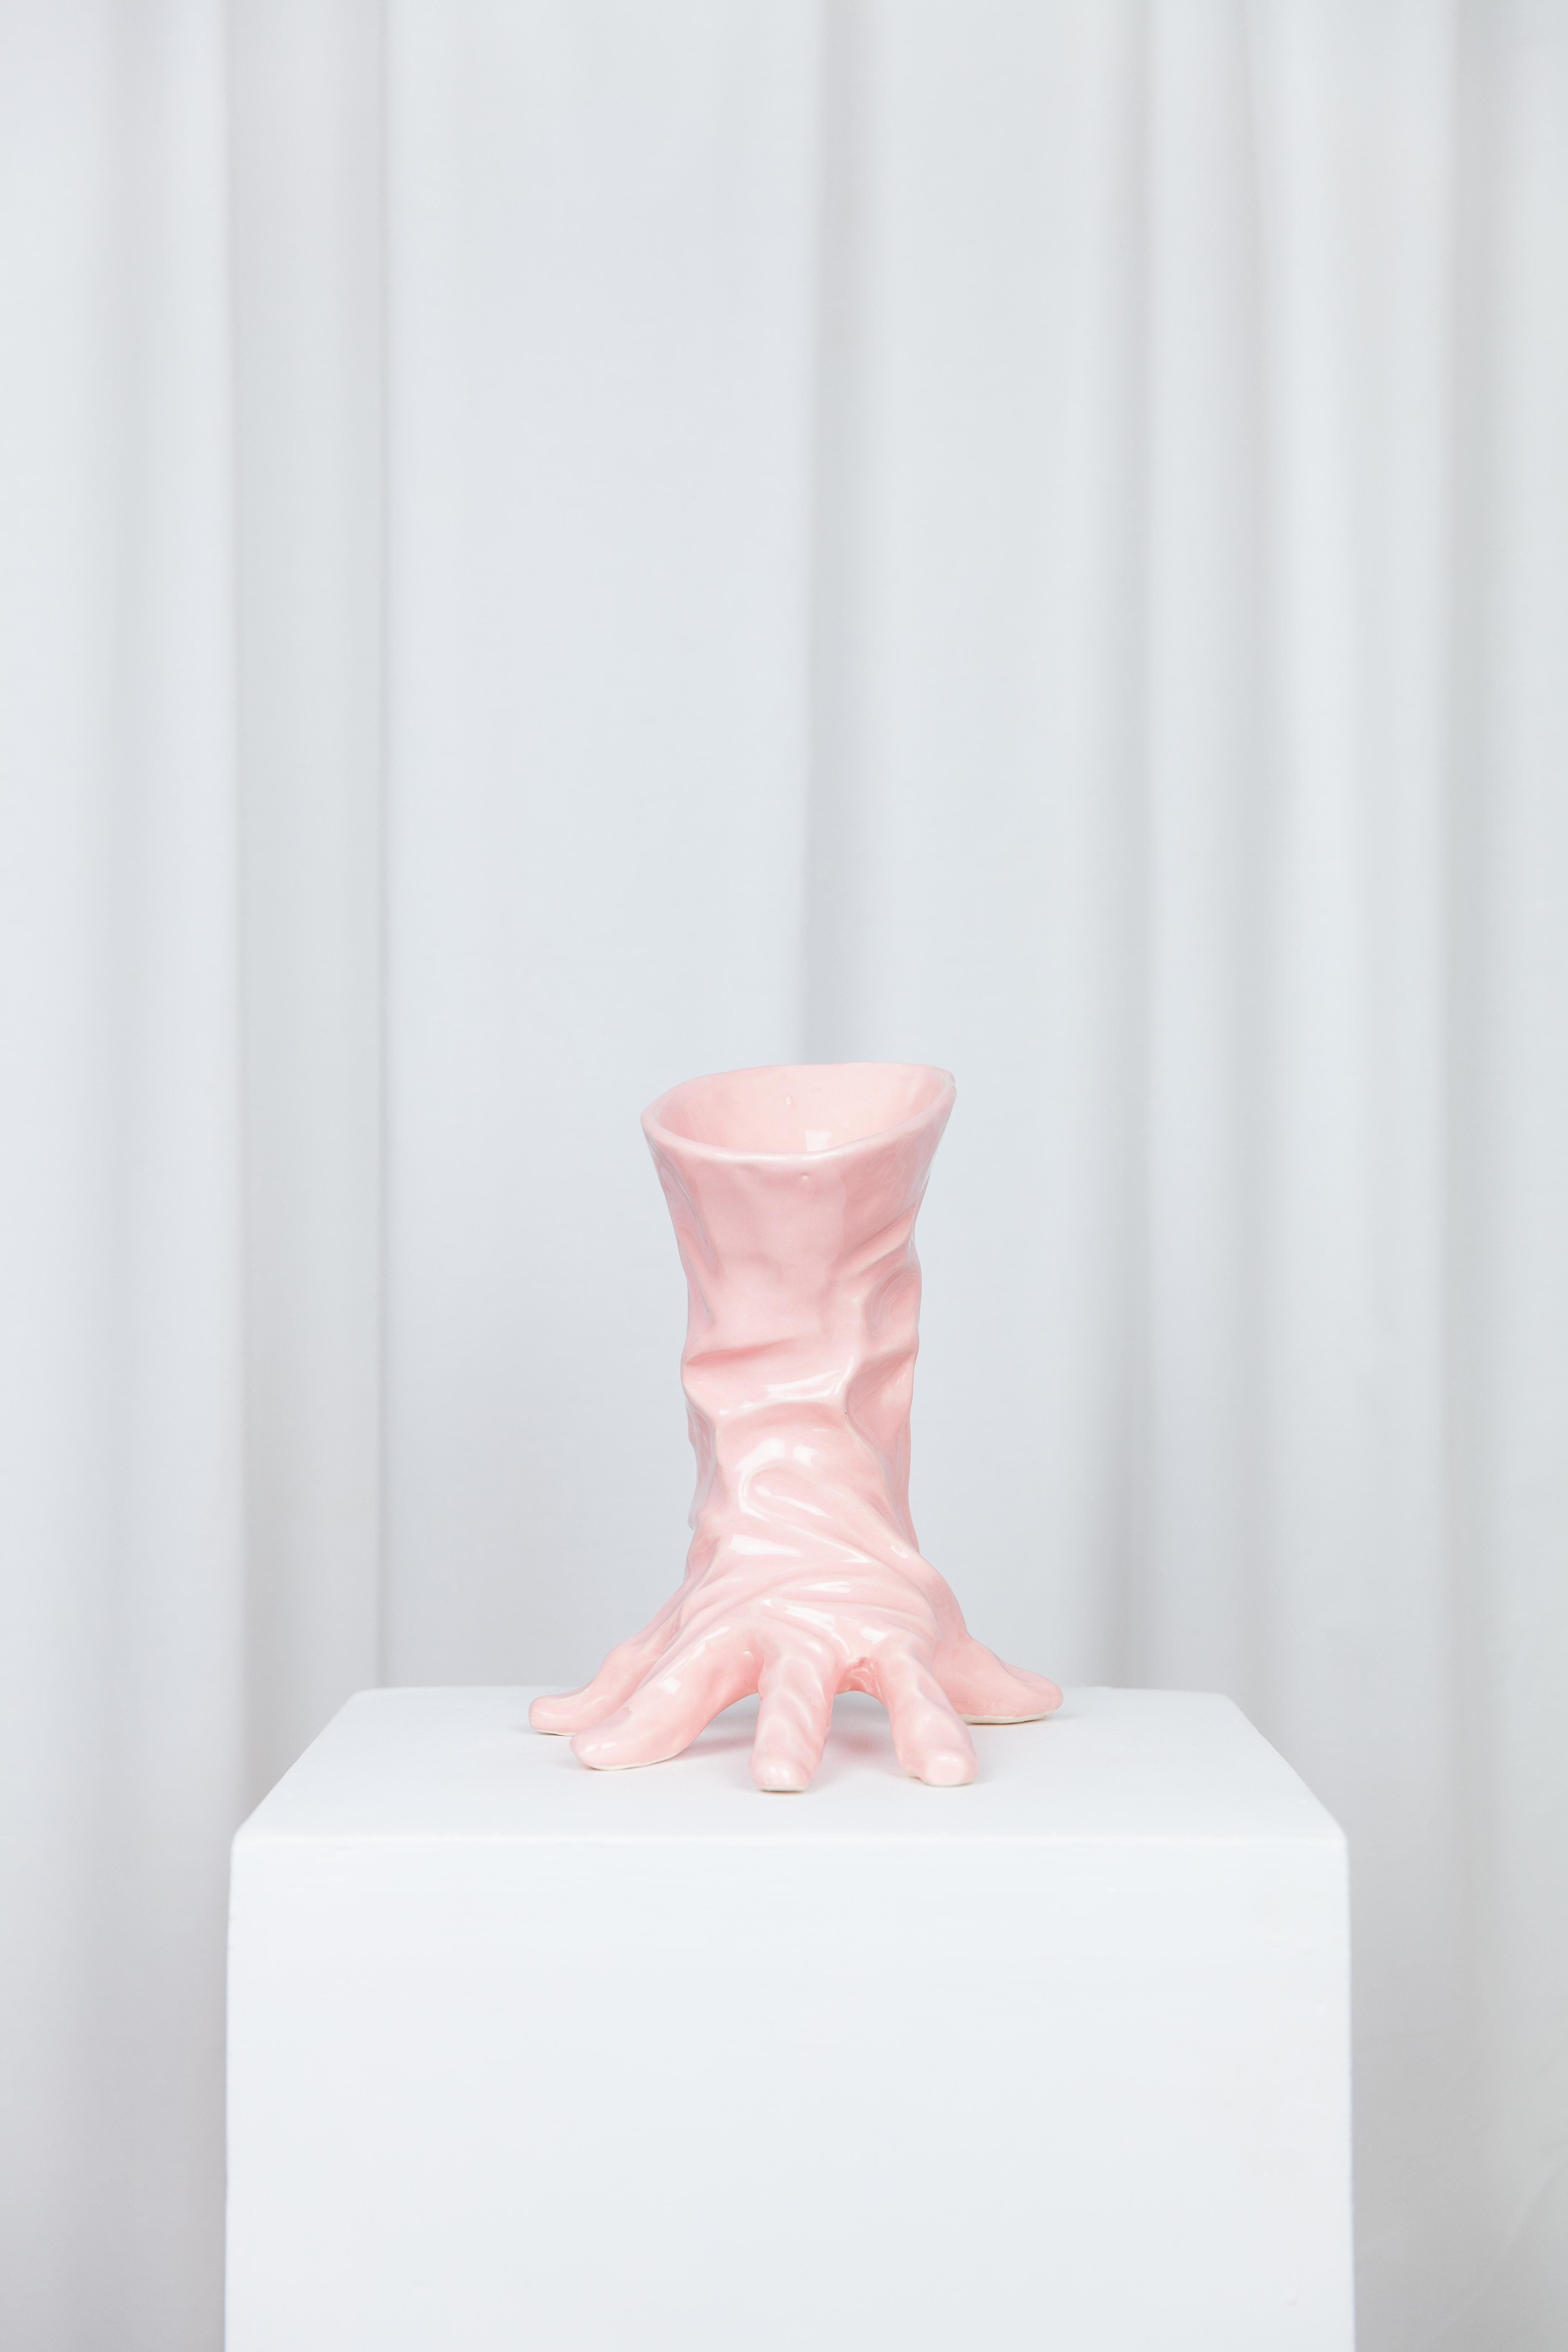 Cleaning glove vase by Lola Mayeras
Dimensions: D 18 x W 16 x W 23 cm
Materials: Earthenware.

Vase in white earthenware, glazed in pink.
This piece is designed and handcrafted in the south of France.

Lola Mayeras — Designer 
In parallel